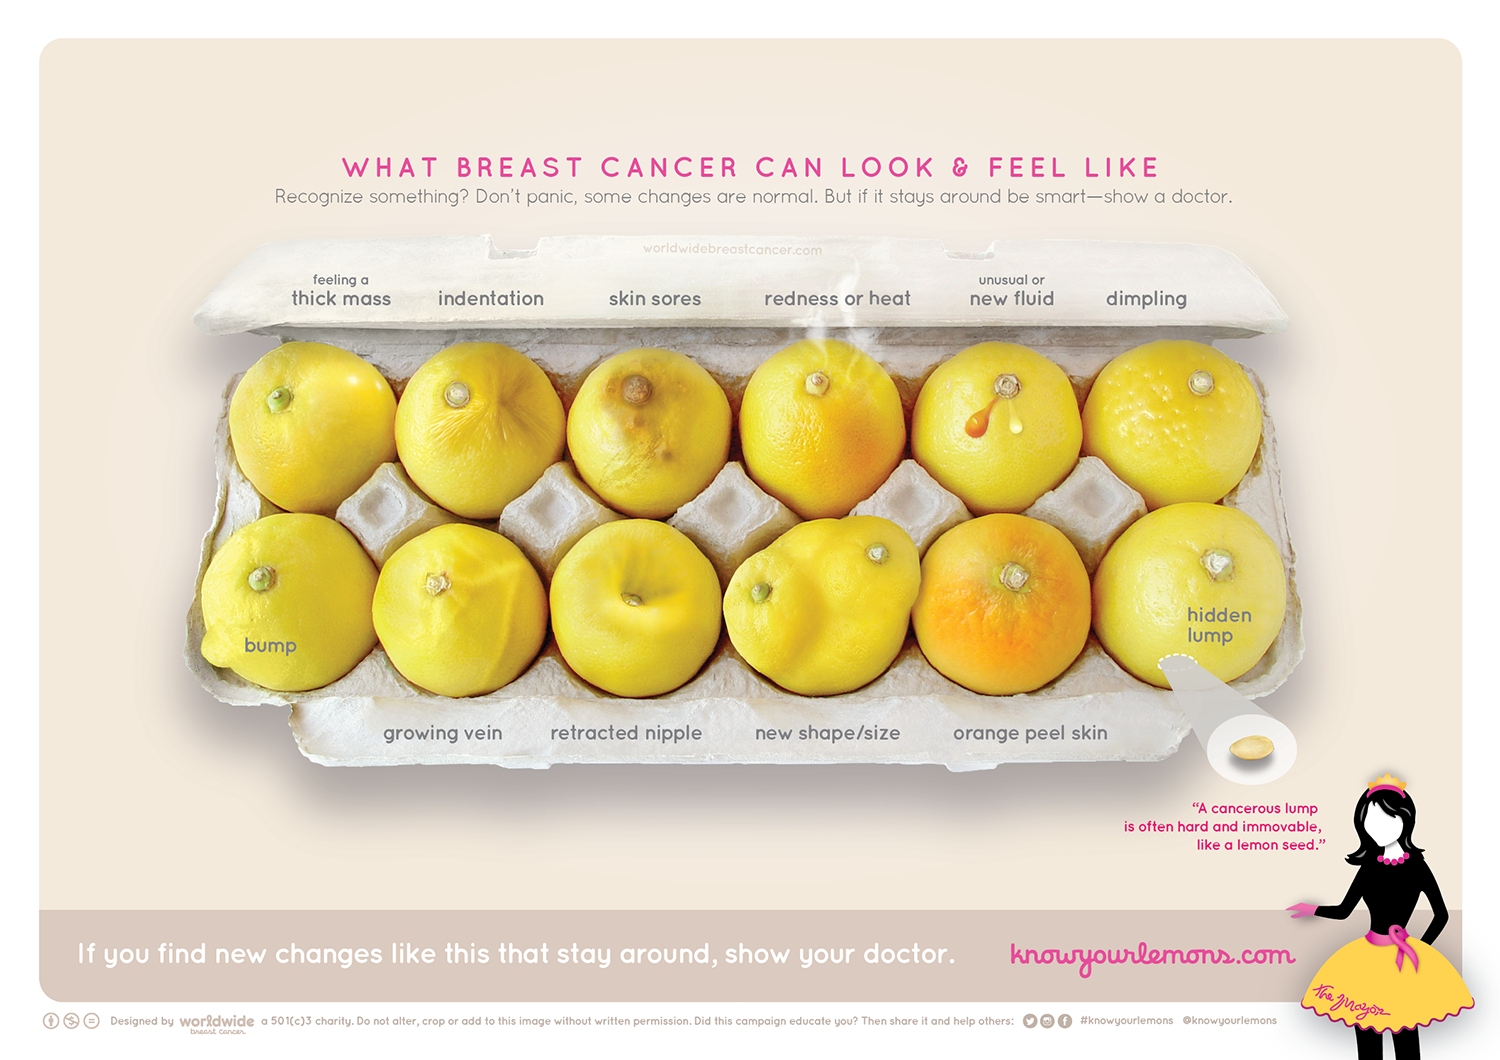 signs of cancer shown on lemons